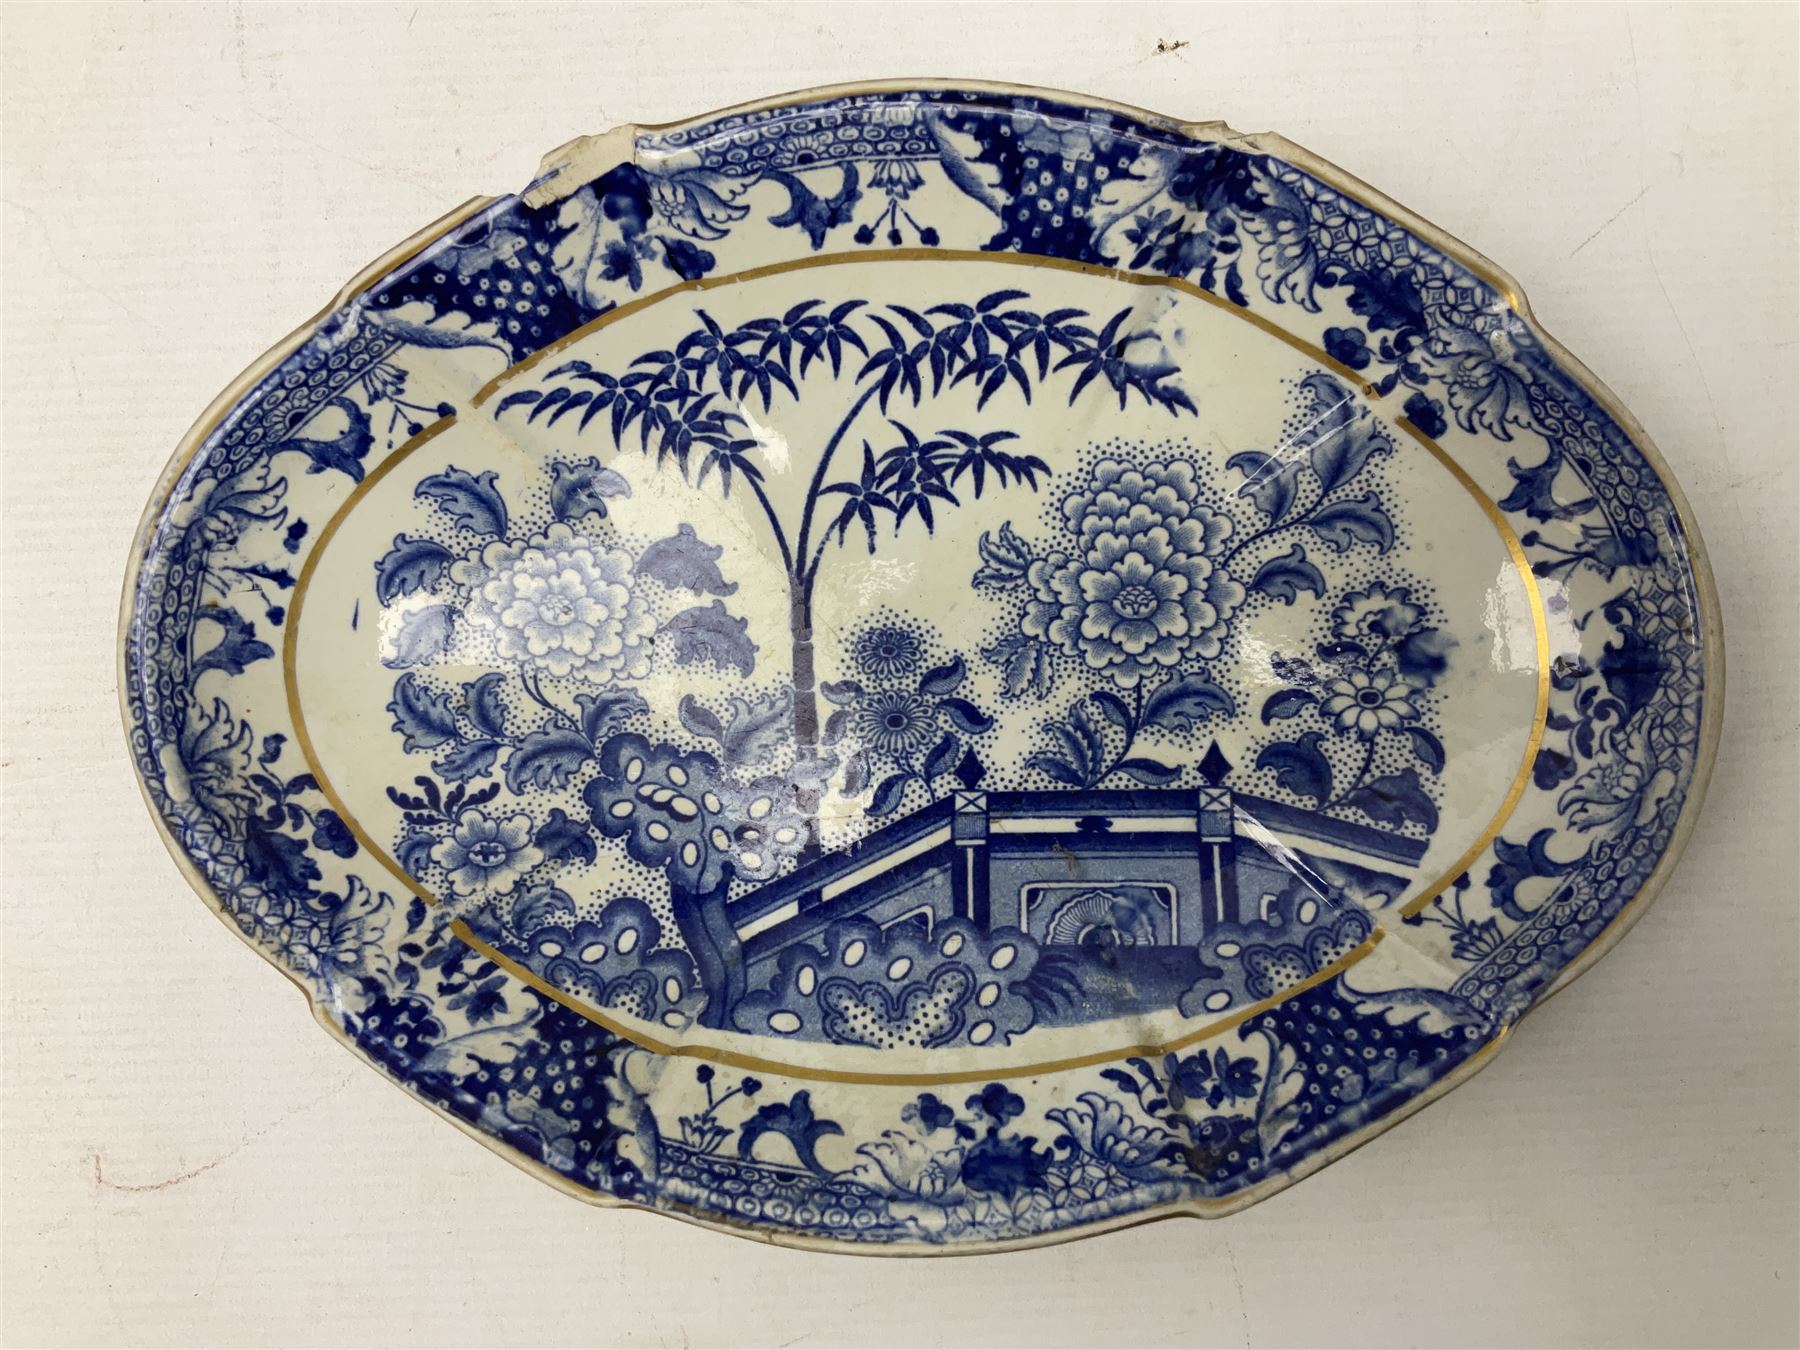 19th century Davenport bamboo and peony pattern dinner wares - Image 9 of 17